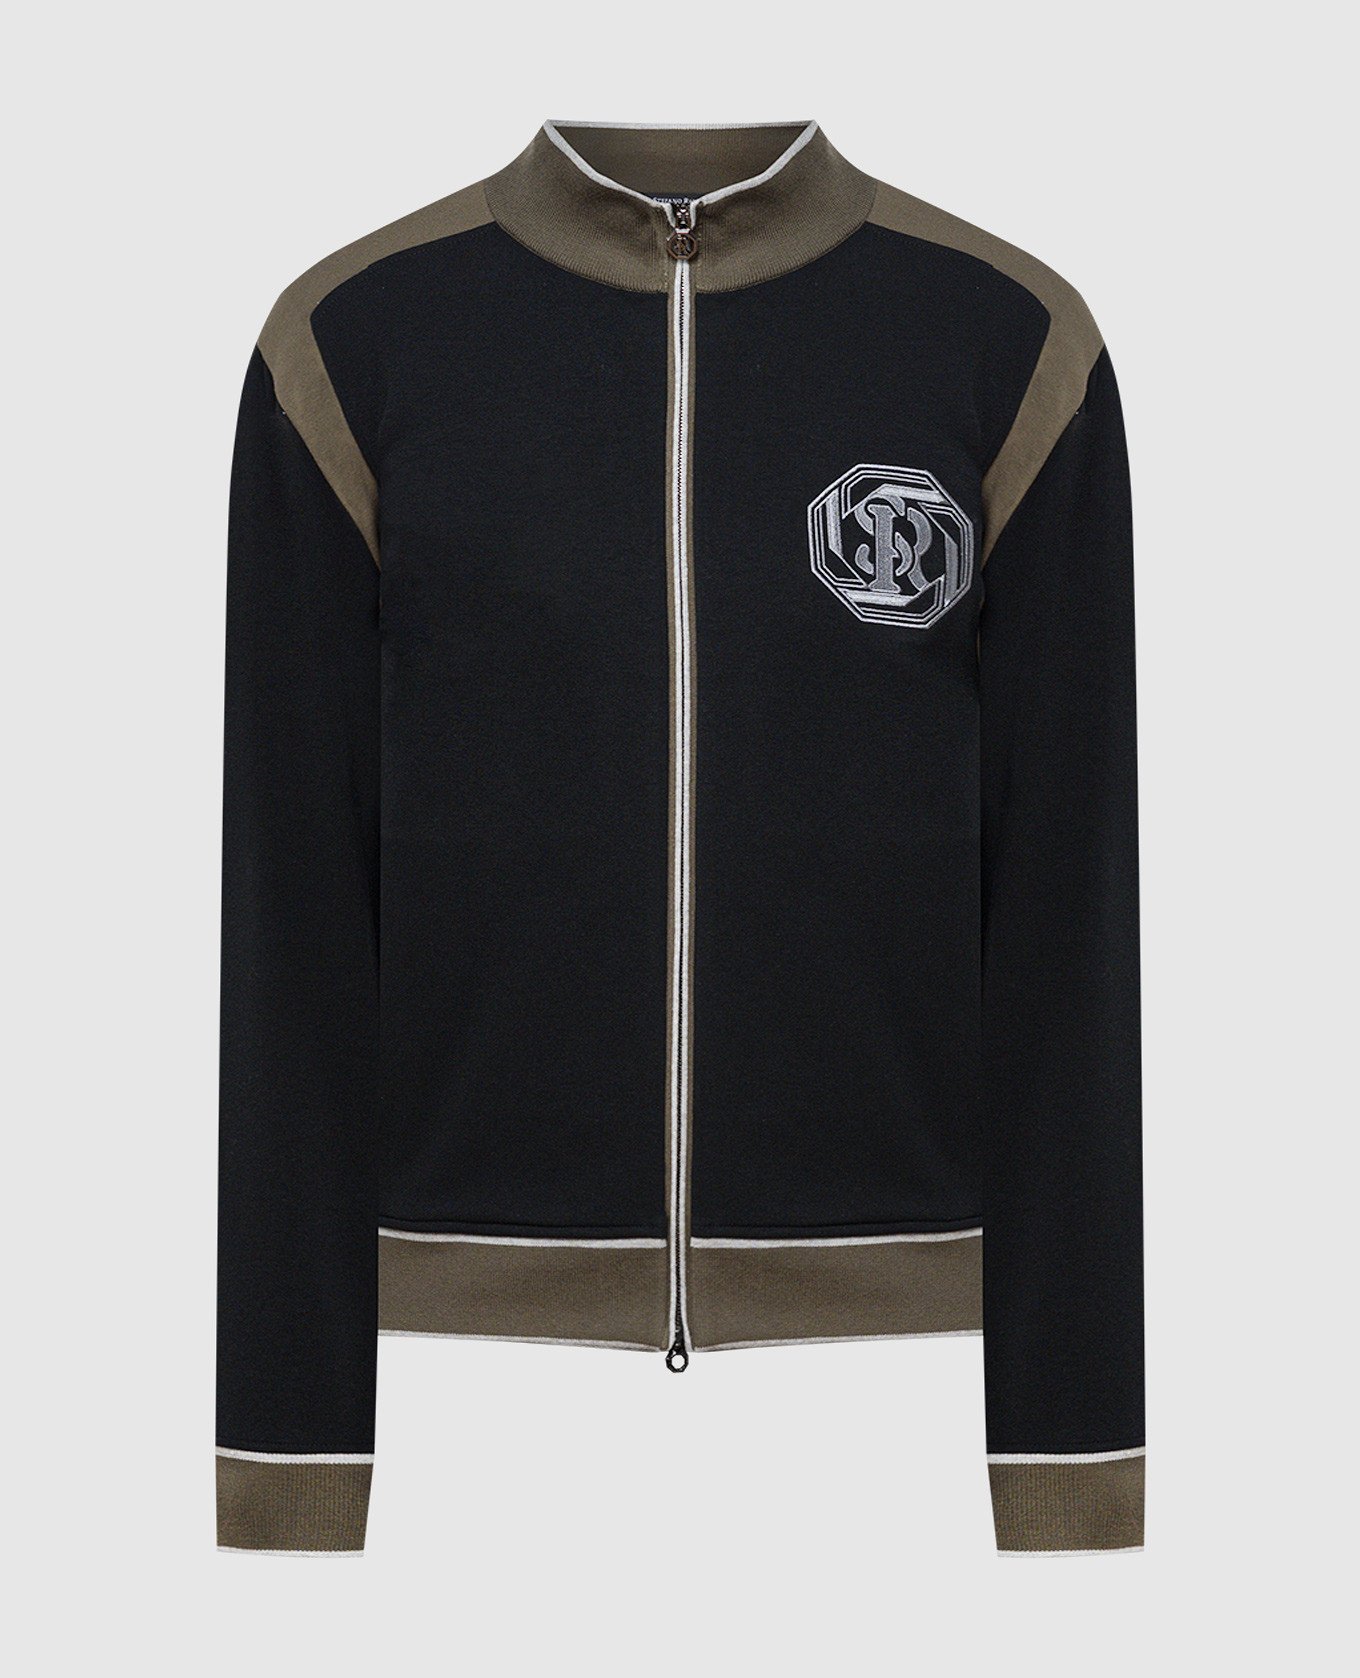 Black sports jacket with logo embroidery